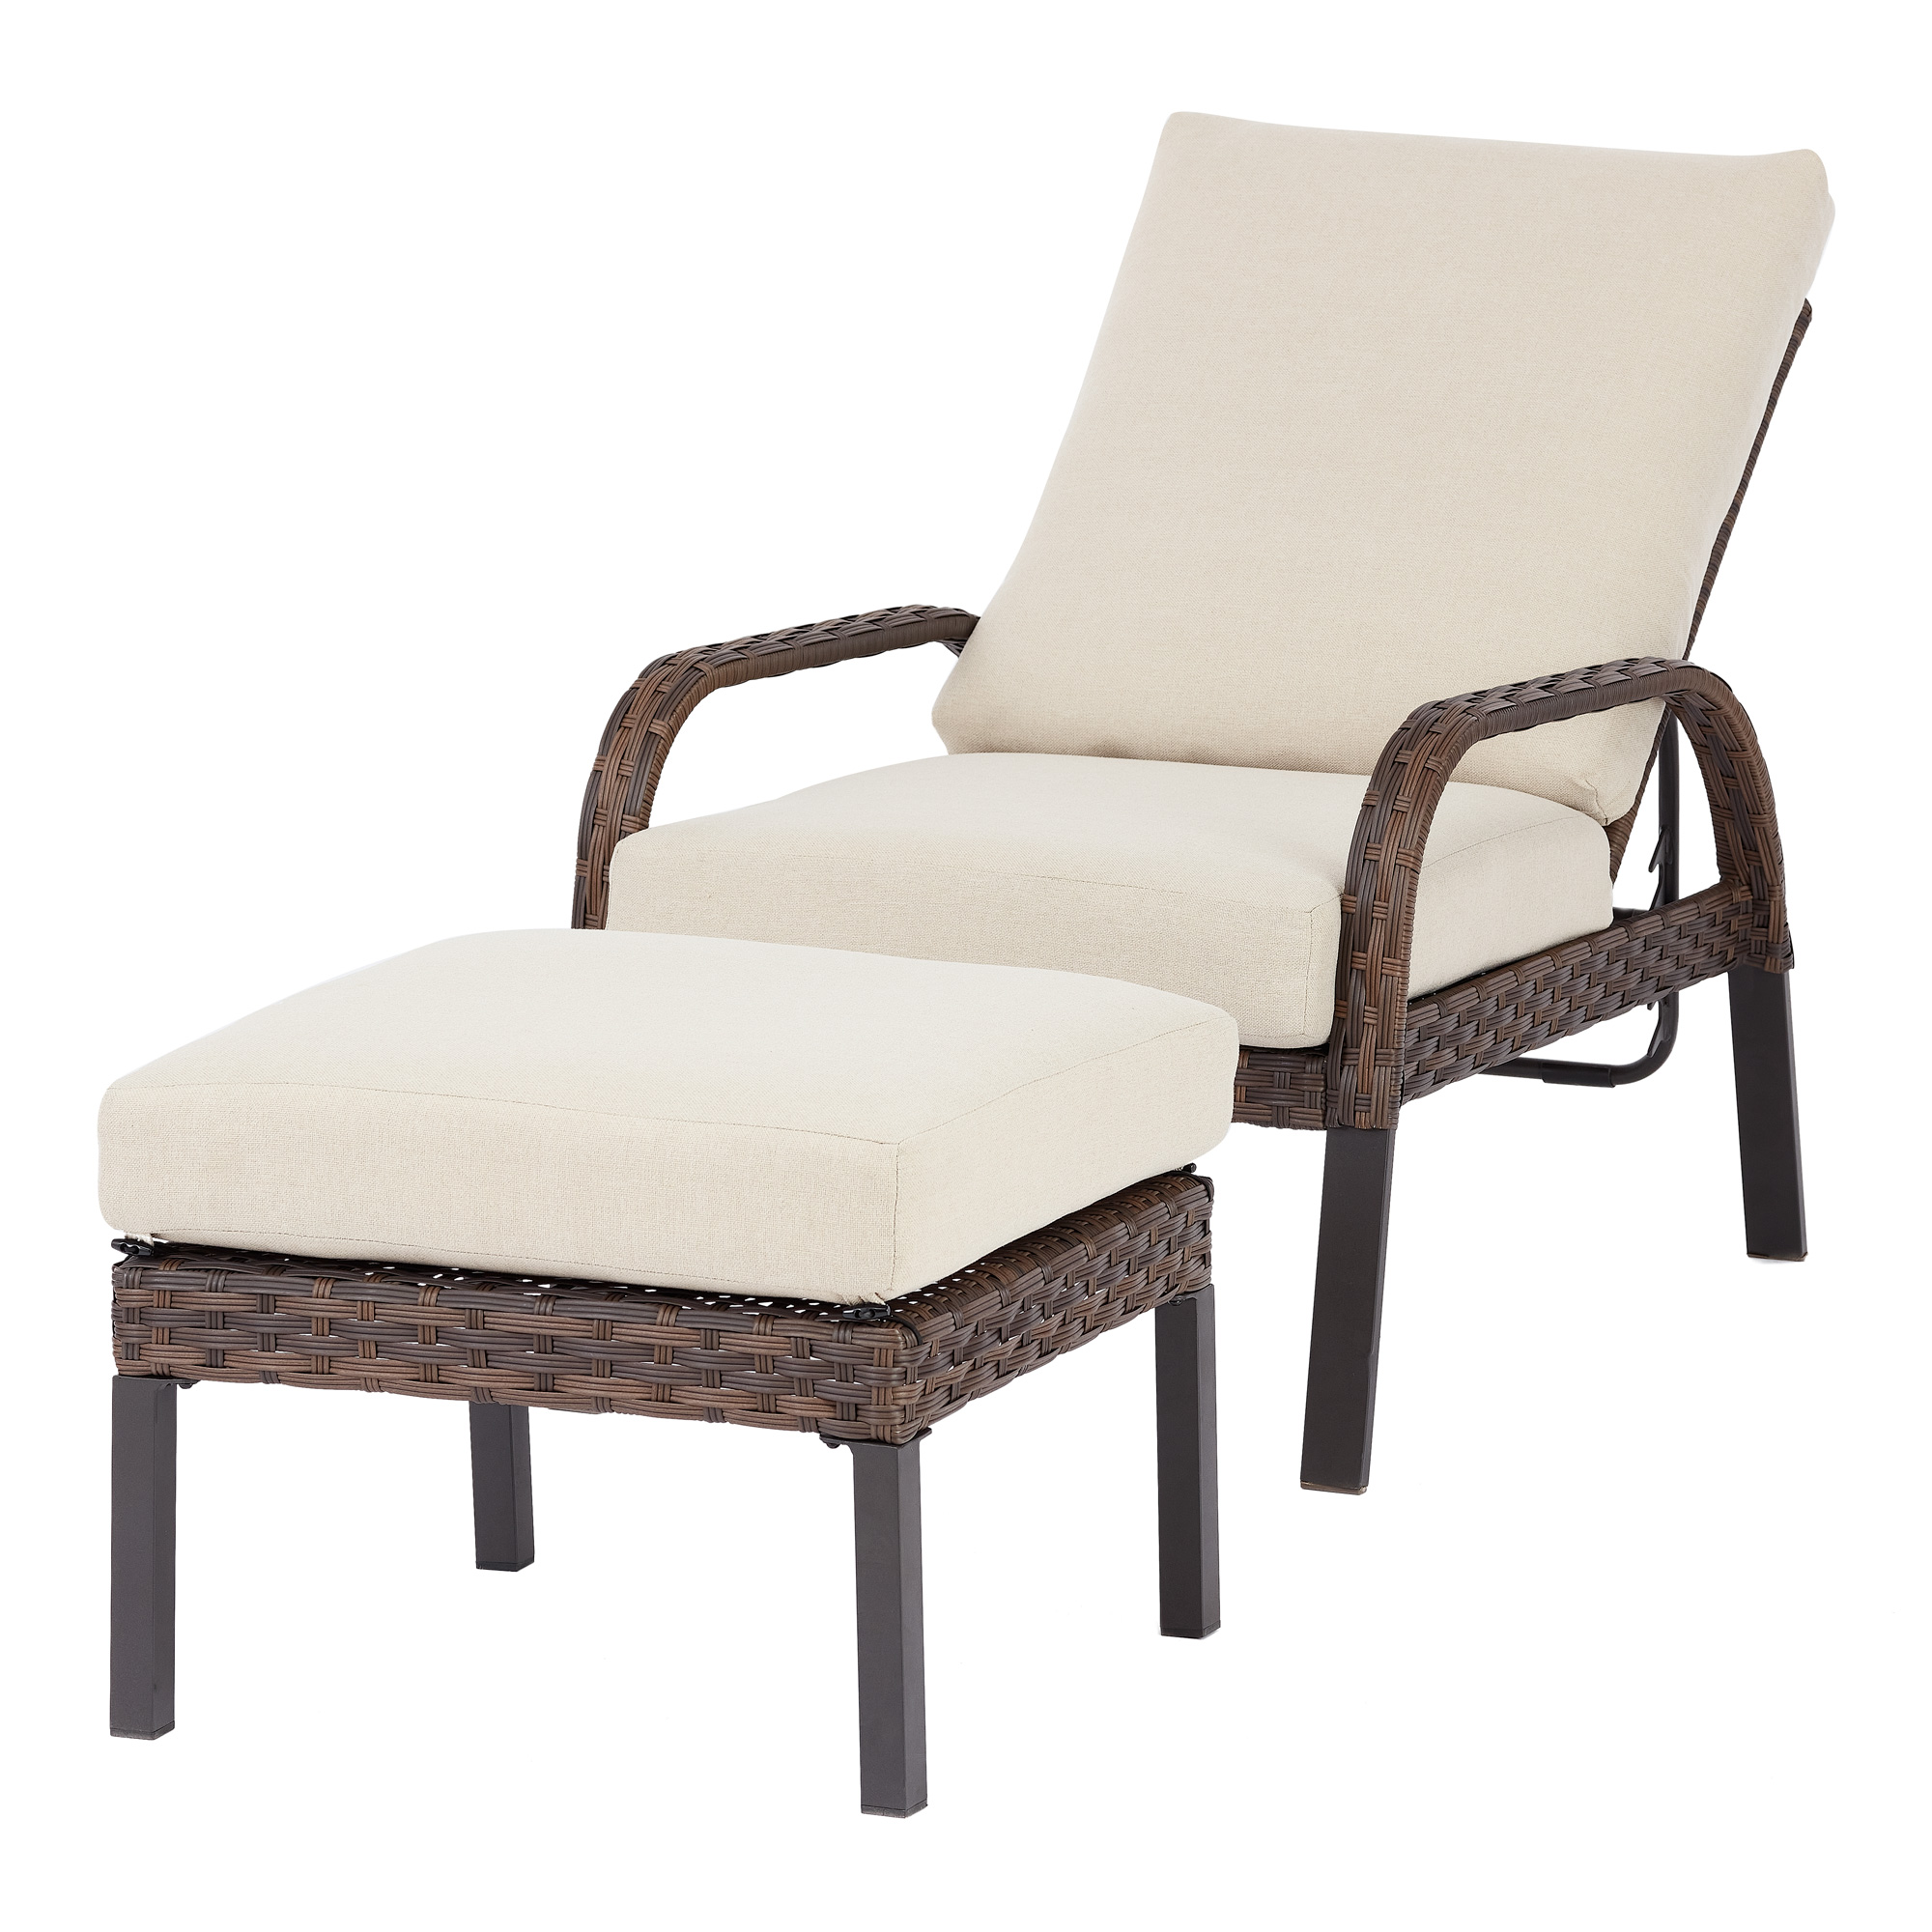 Mainstays Tuscany Ridge Wicker Reclining Chaise Lounge with Ottoman, Beige - image 1 of 8